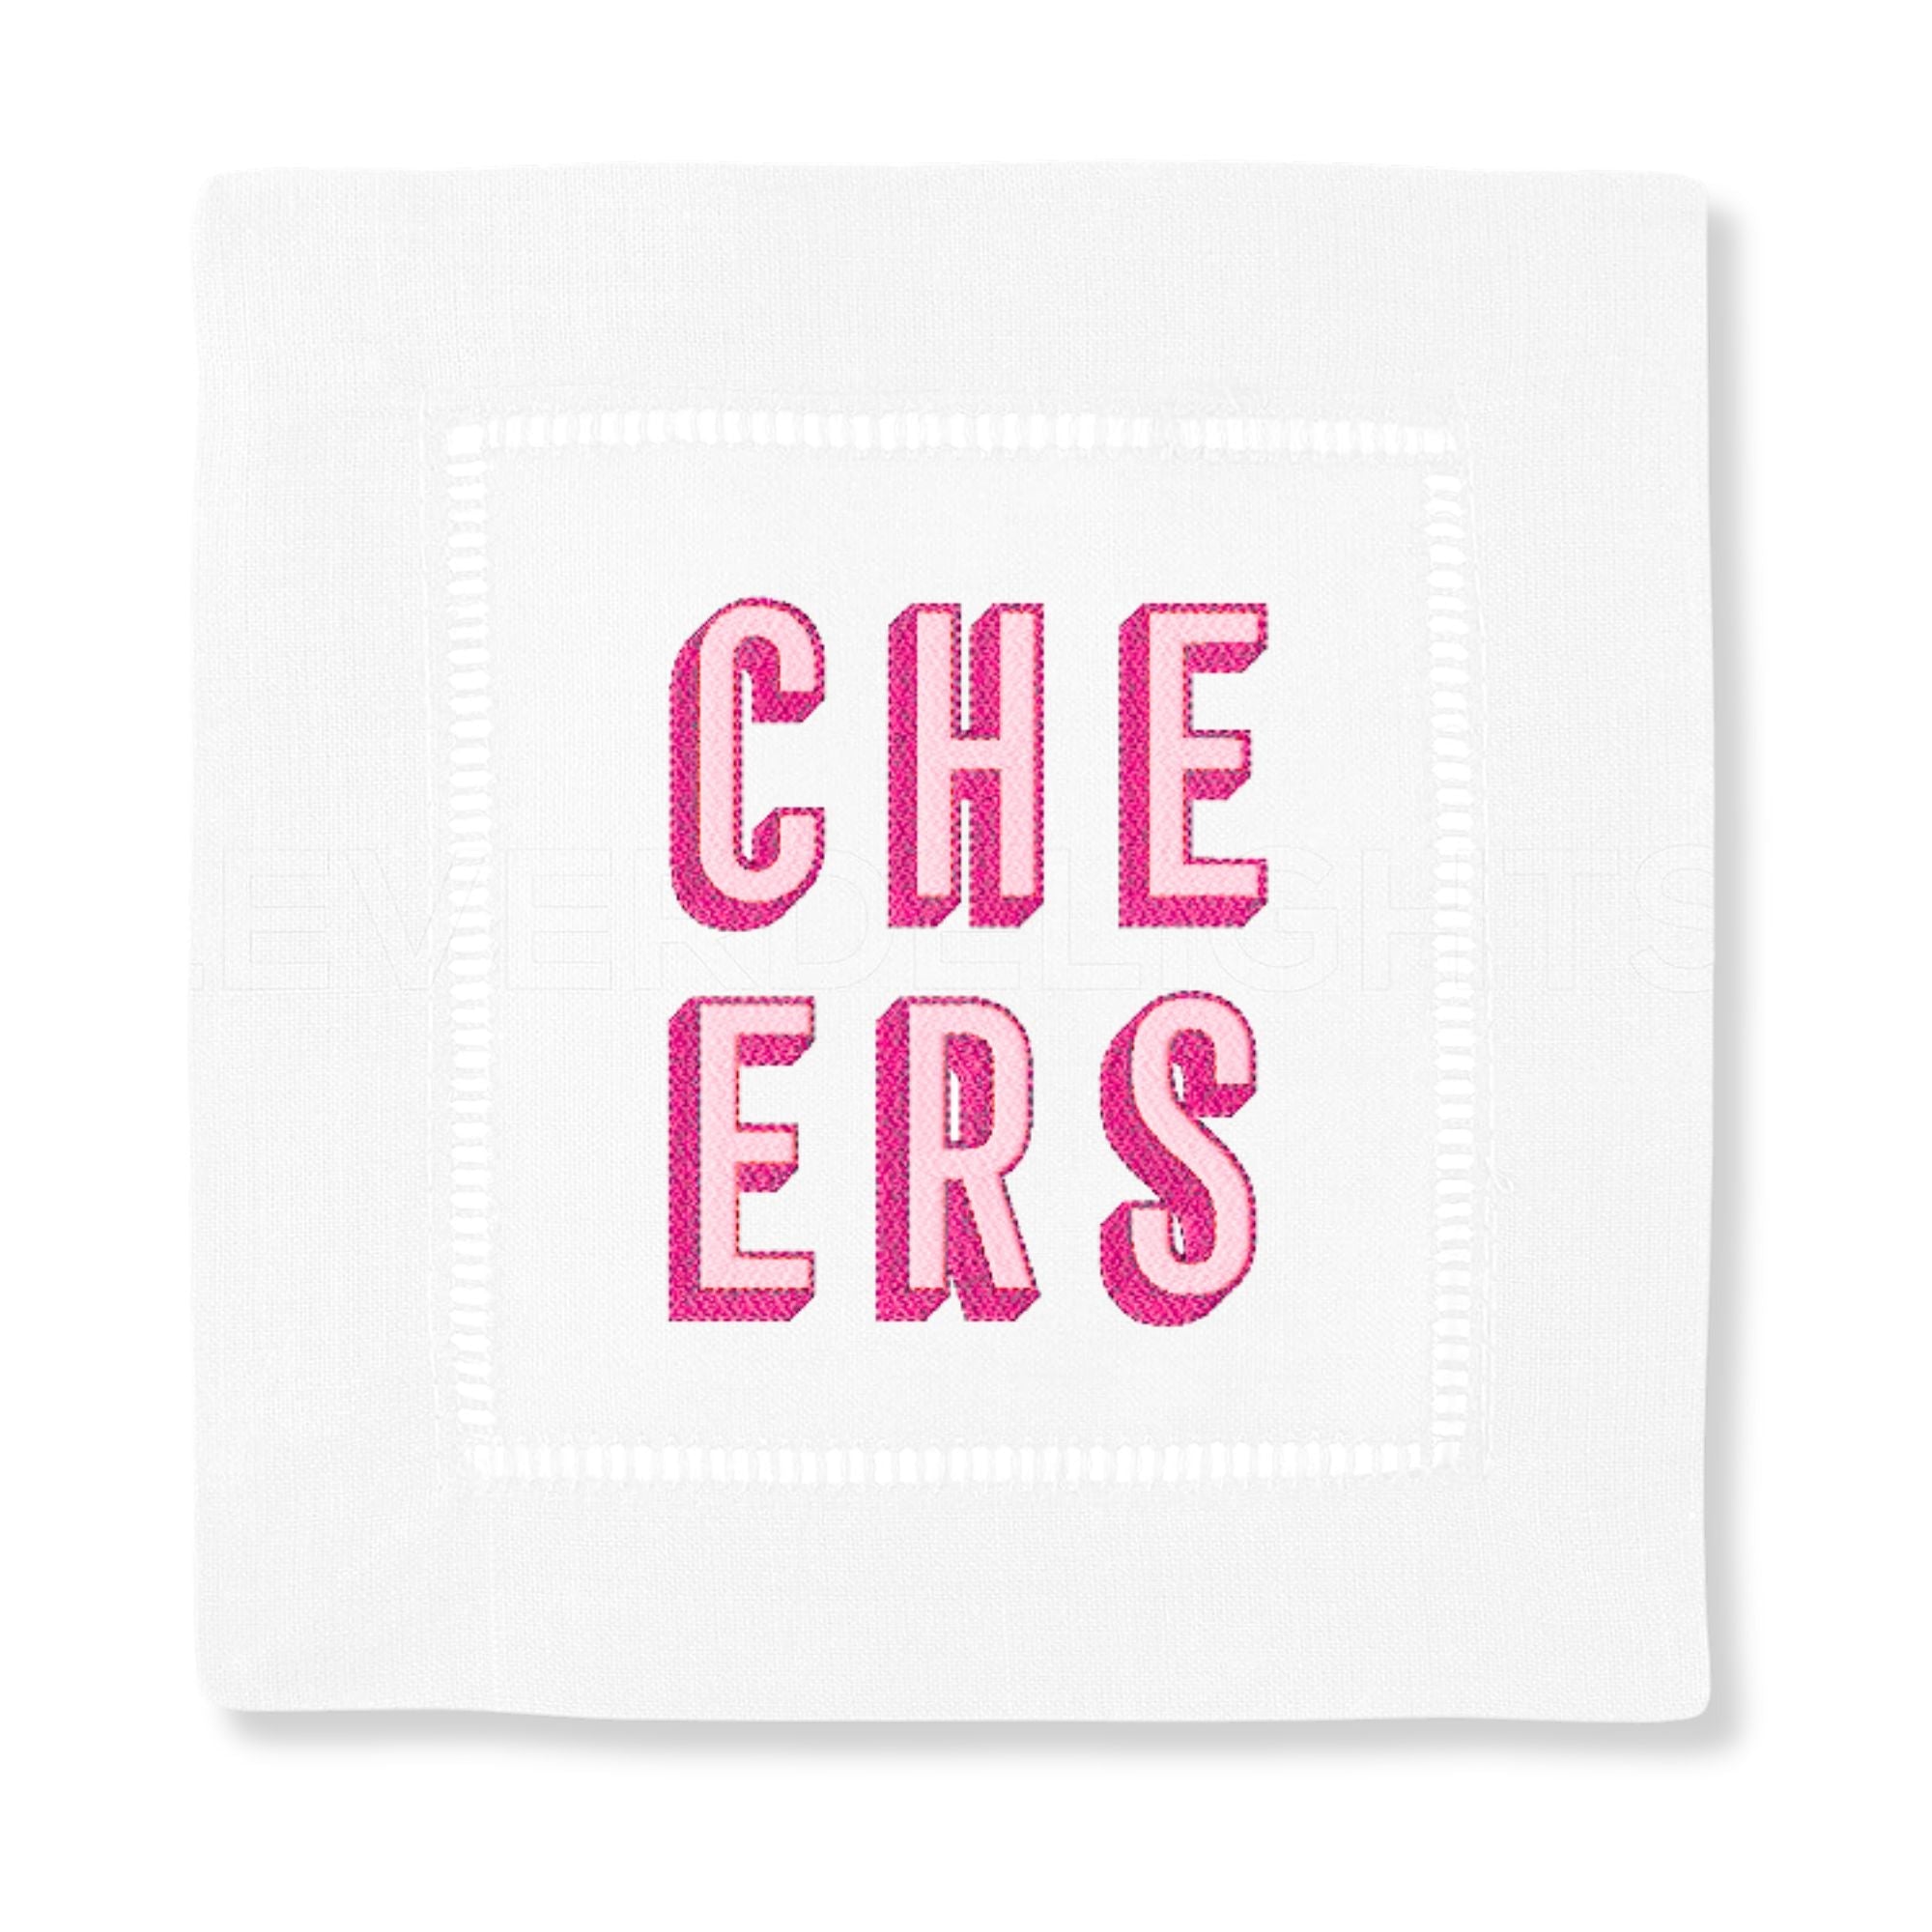 https://cdn.shopify.com/s/files/1/0128/5534/5209/products/cheers-cocktail-napkins-set-of-4-694945_2000x.jpg?v=1698838529